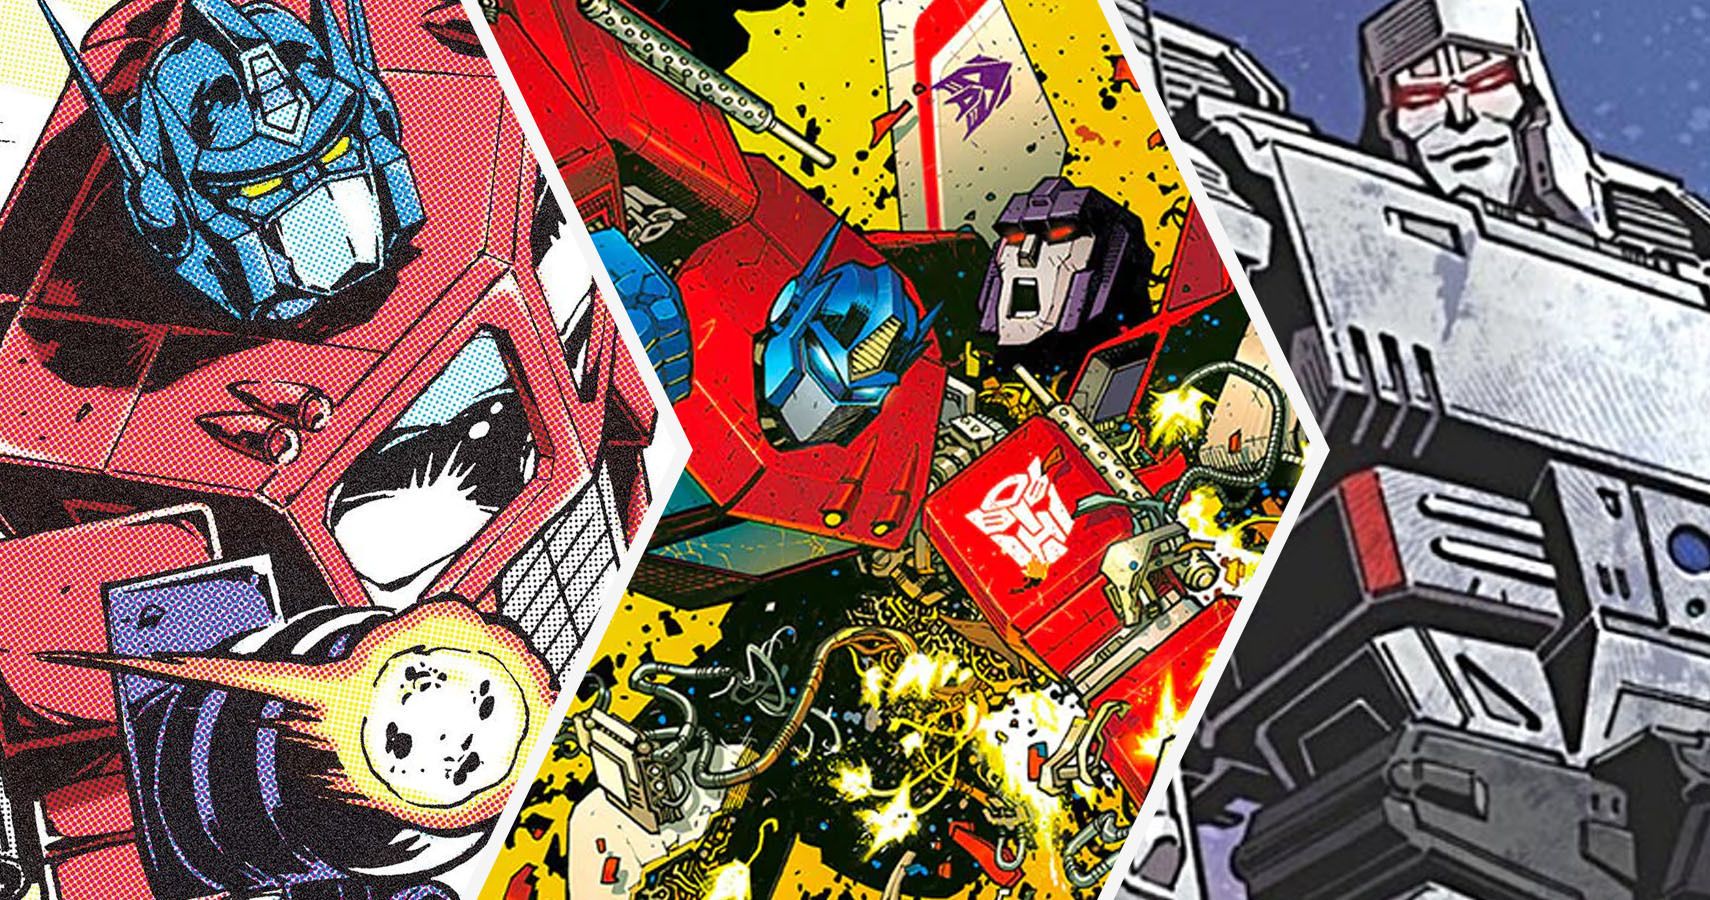 A split image of Optimus Prime, Optimus fiA split image of Optimus Prime, Optimus fighting Starscream, and Megatron from Transformers Comicsghting Starscream, and Megatron various Transformers Comics